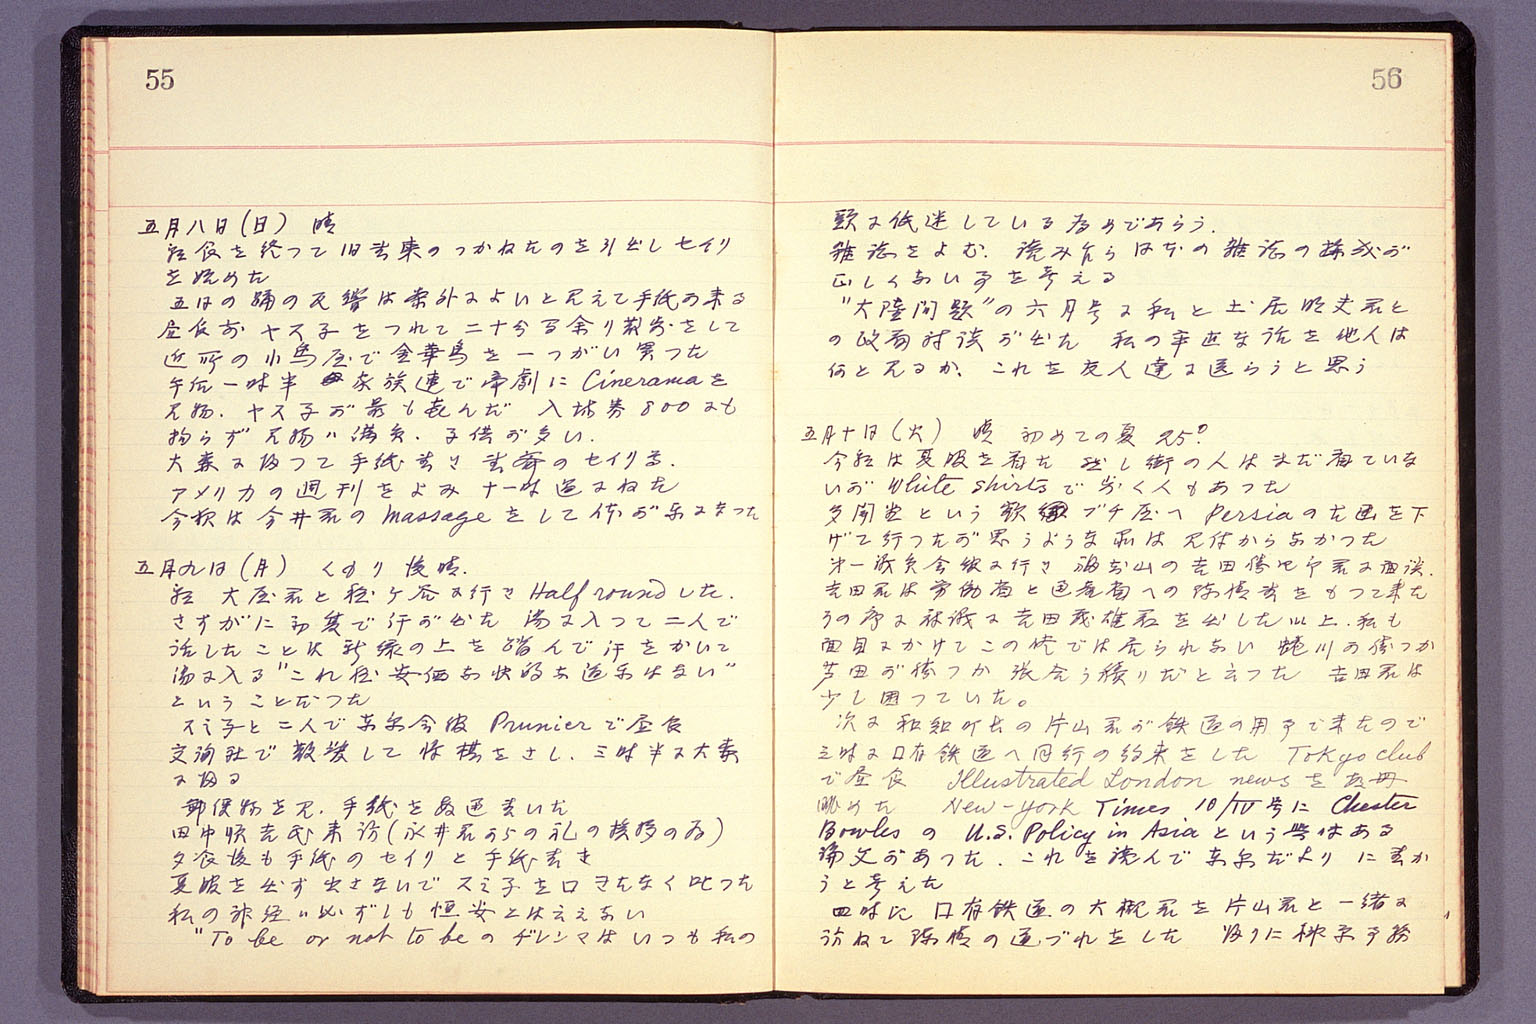 Diary from the end of March 1955 to September 15, 1955 (larger)